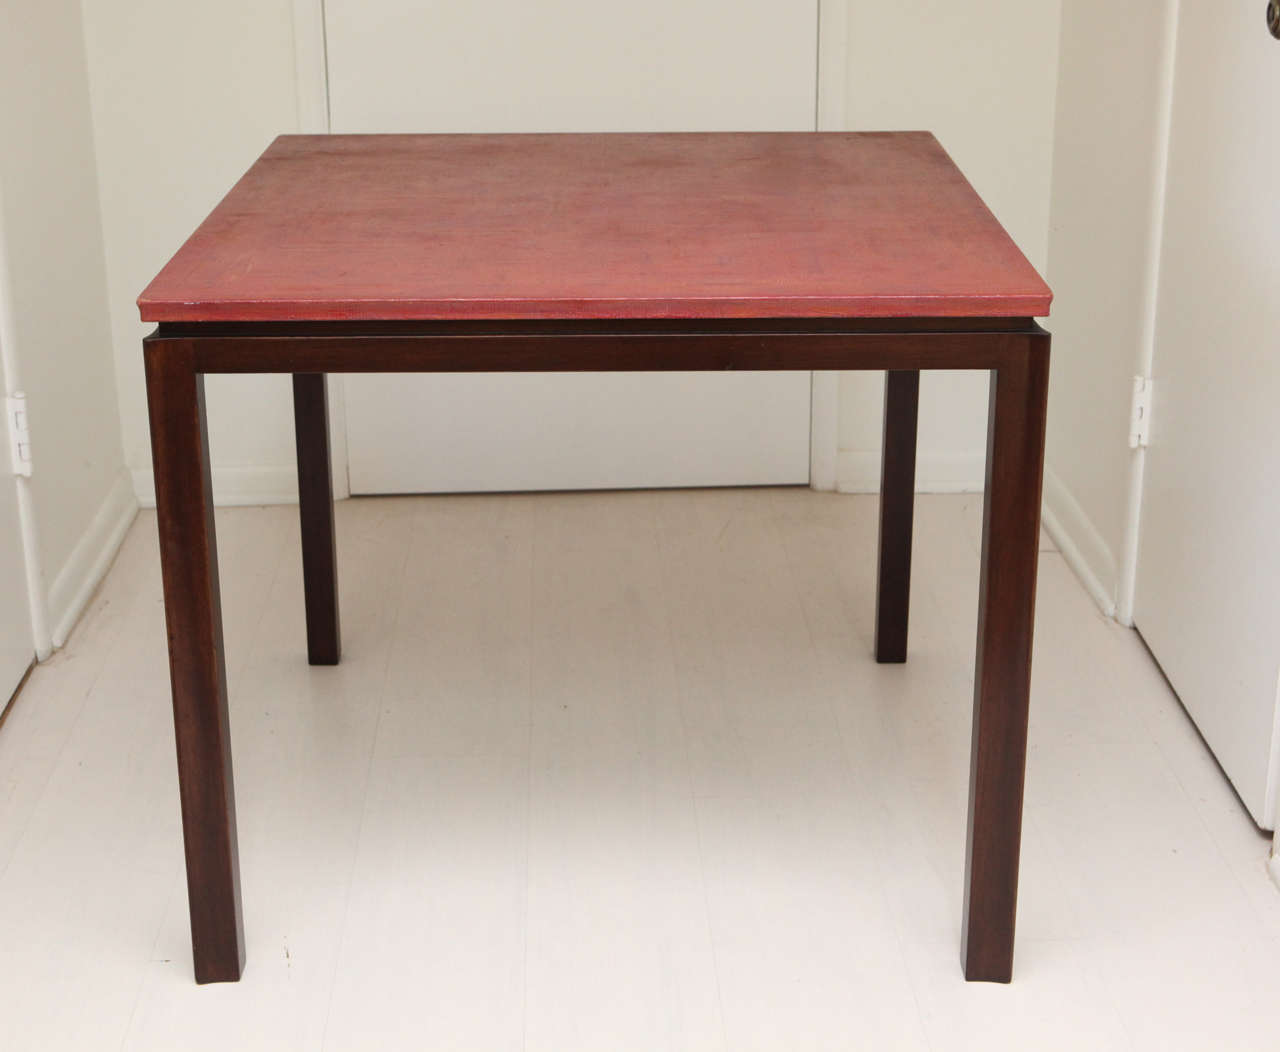 Unique and rare Edward Wormley Game Table for Dunbar in pristine condition. One of a kind painted grass cloth top in deep rose coral. Very Special.